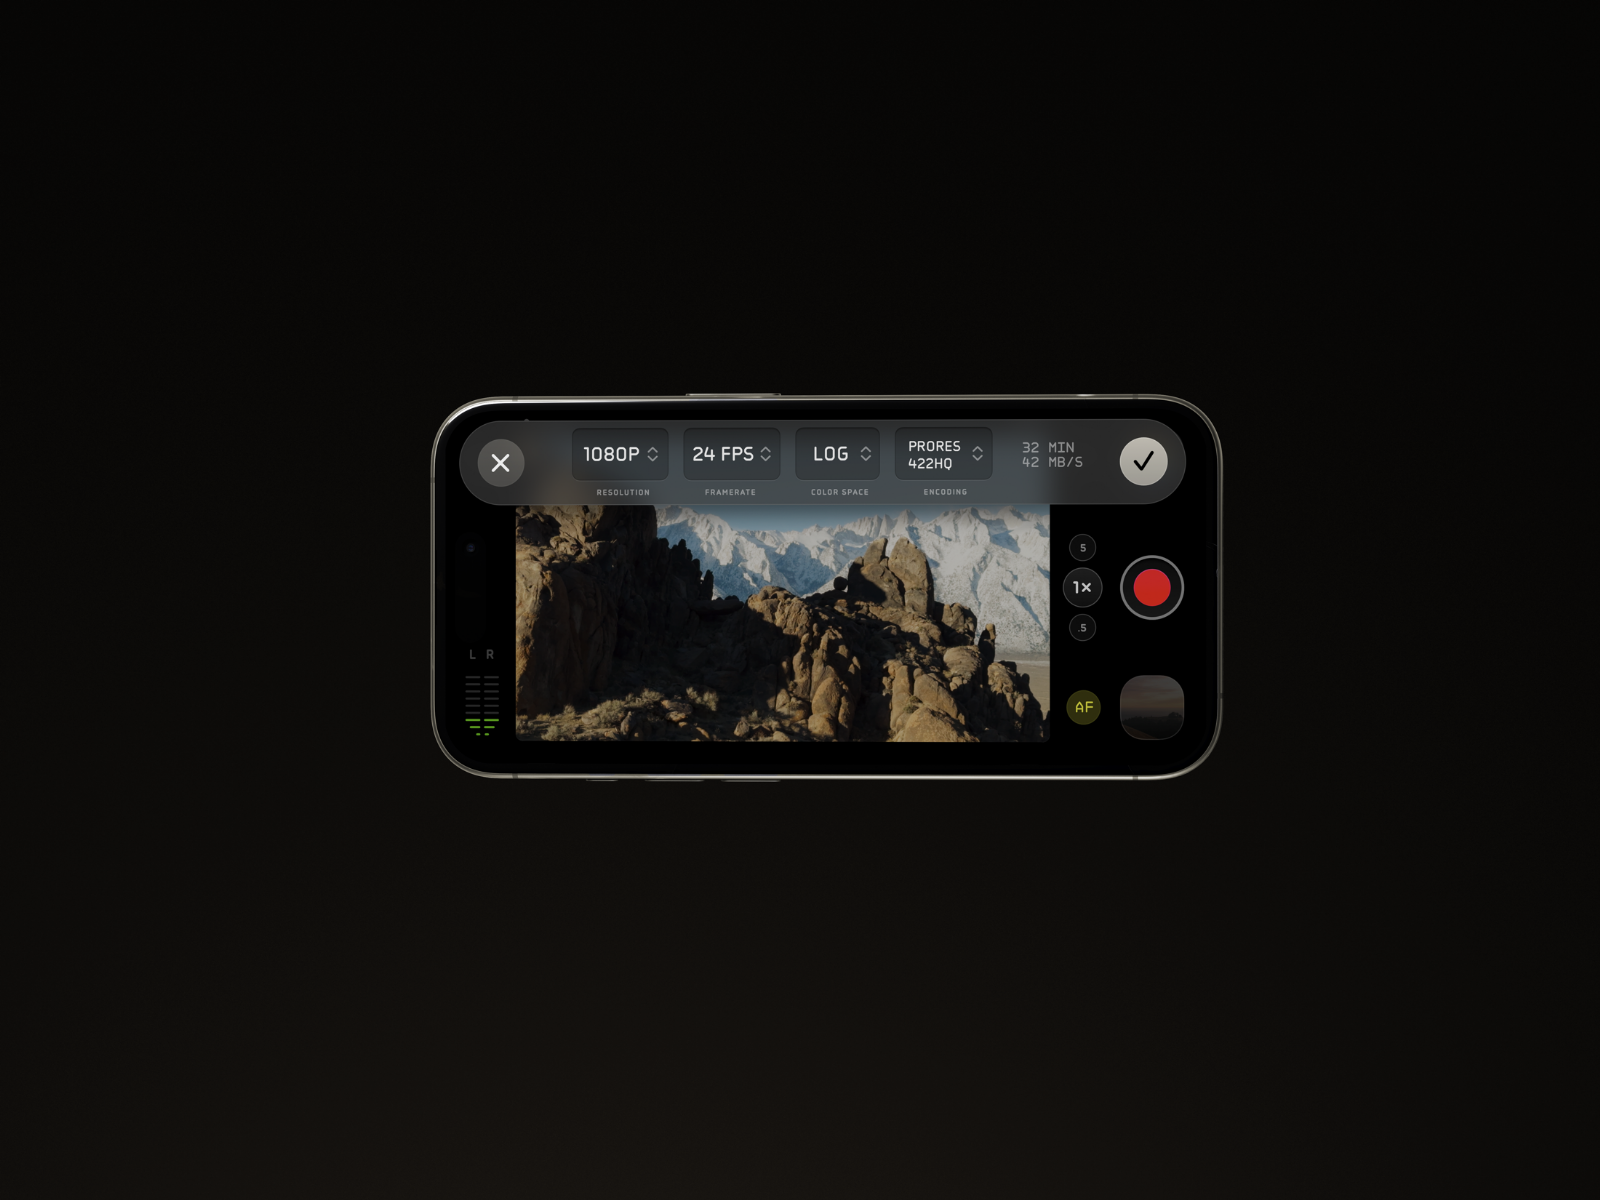 Kino is a new iPhone app for videographers from the makers of Halide